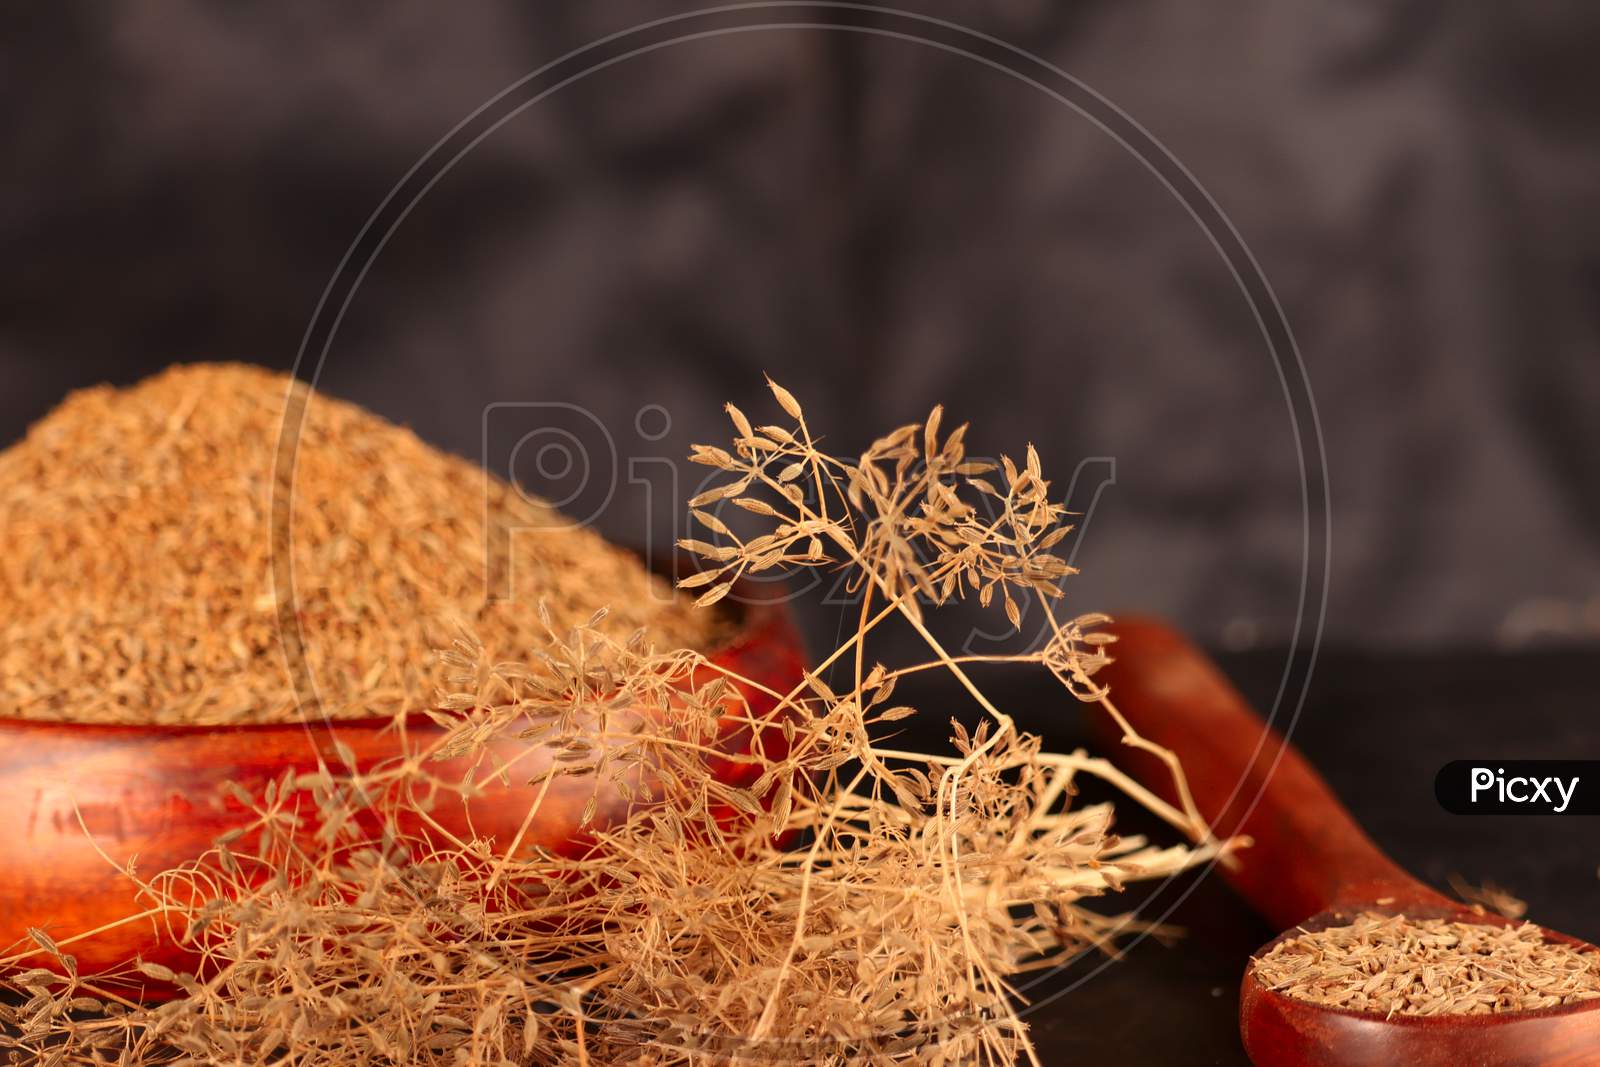 Cumin (Caraway) Spices On Wooden Spoon,Caraway Plant With Carvi Seeds On Black Background,Jira Plant, White Bowl In Zira